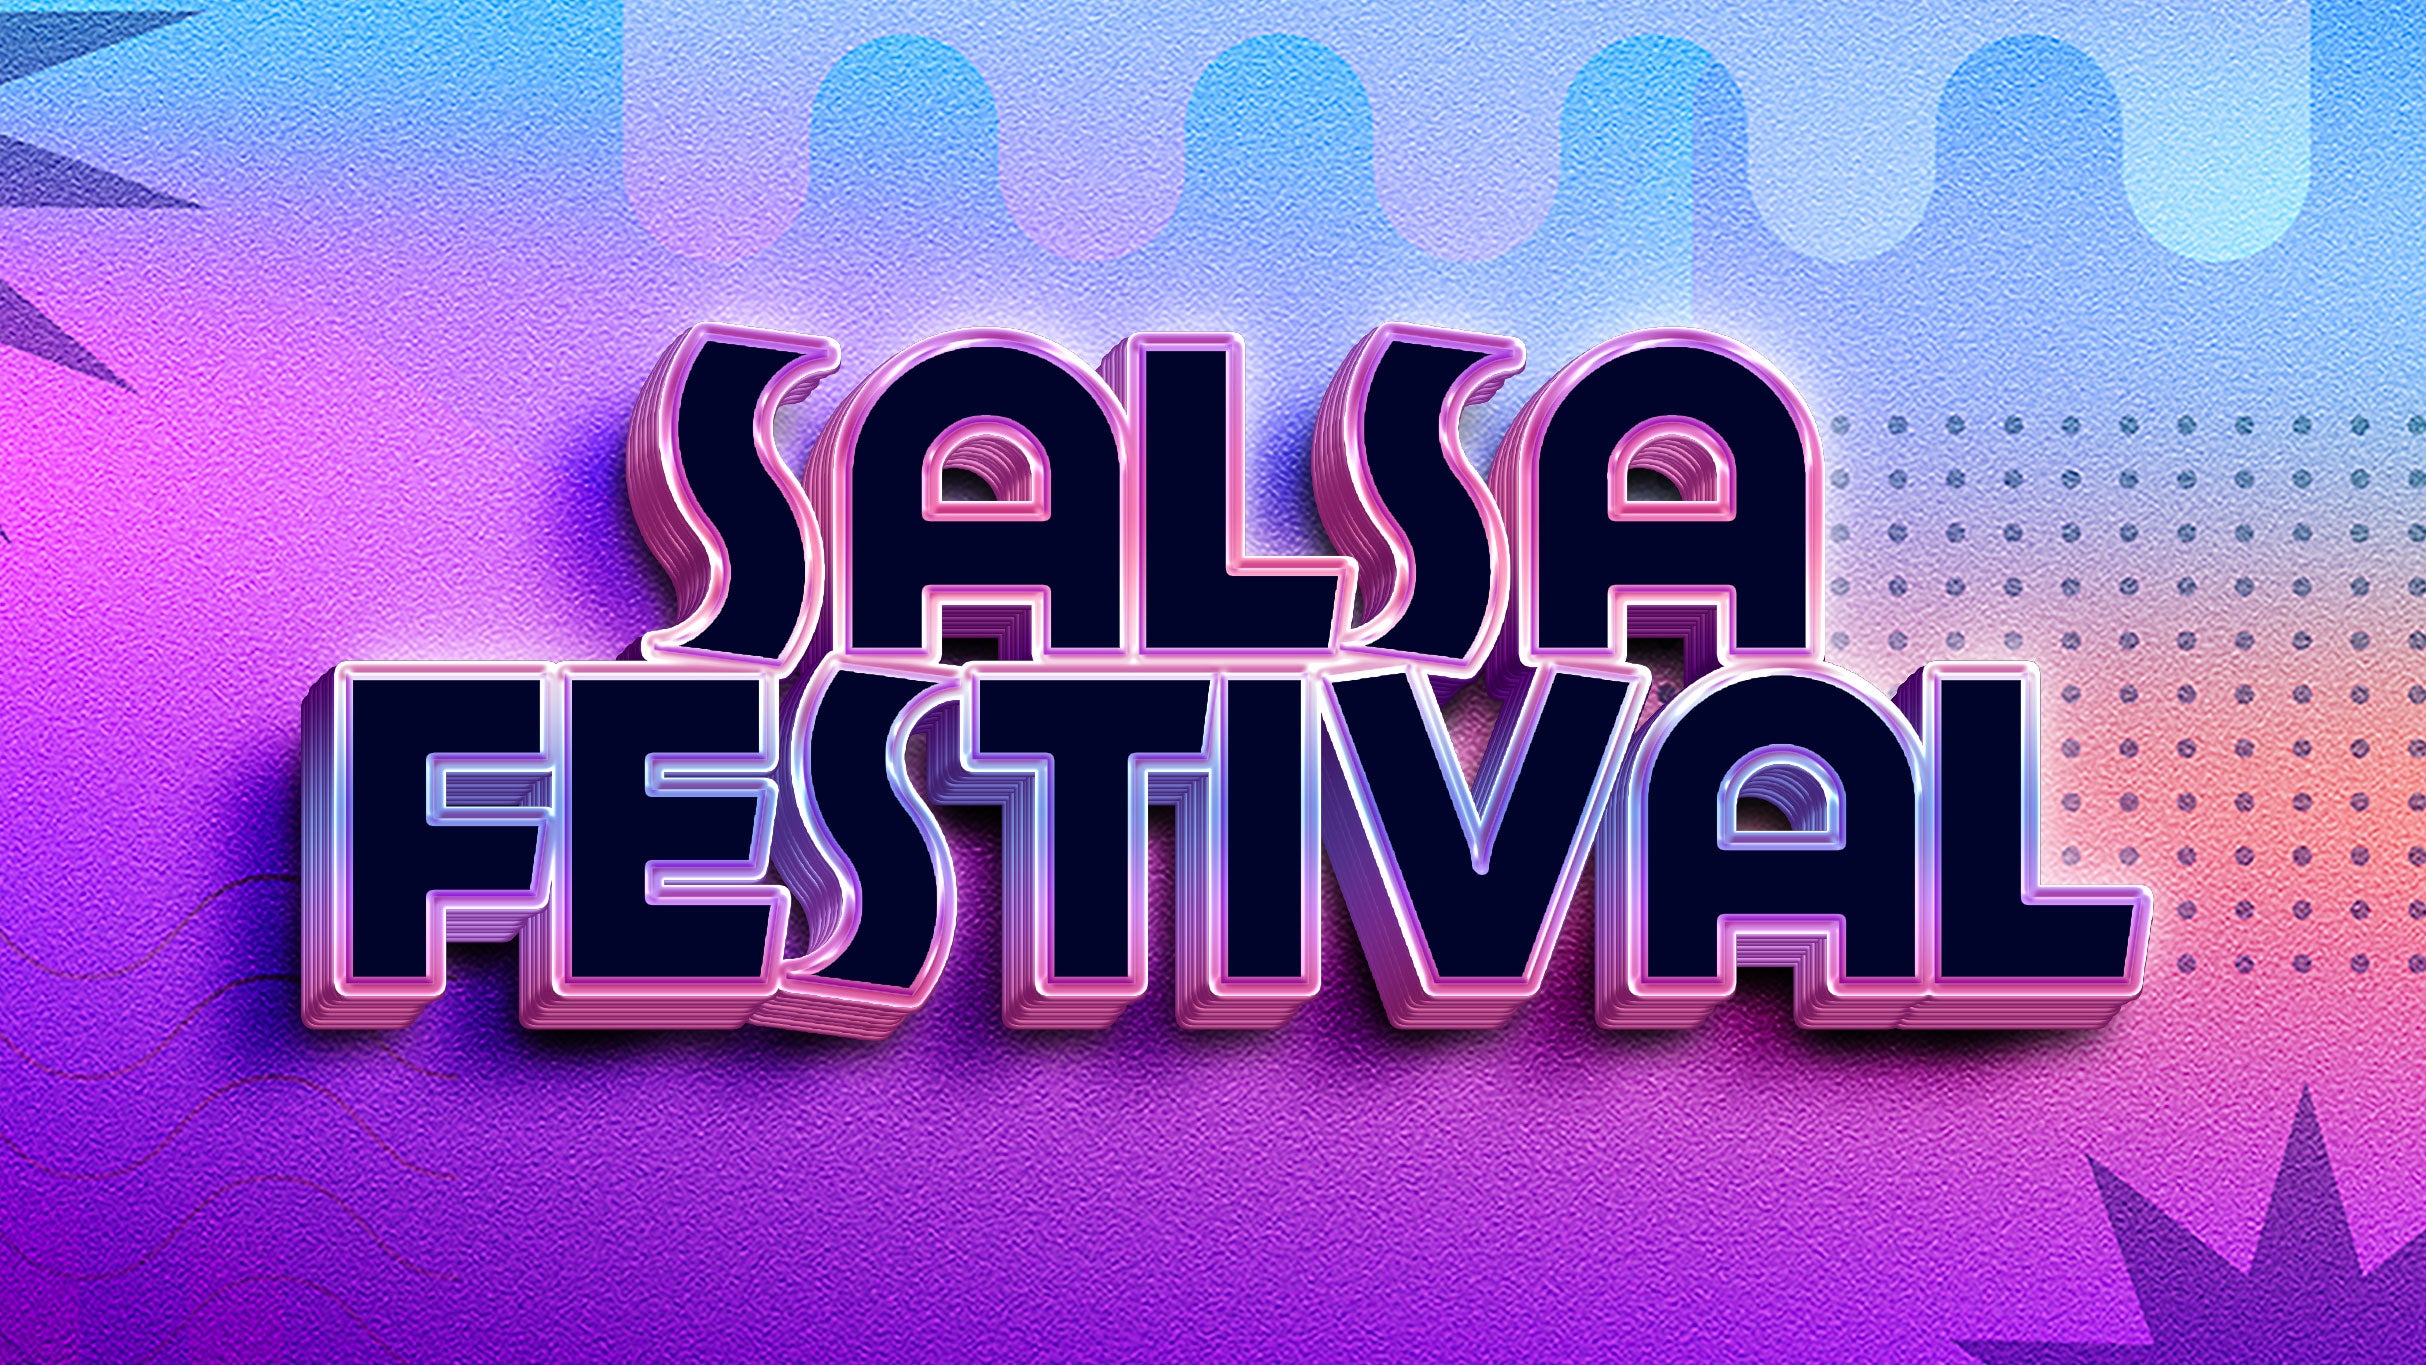 The New York Salsa Festival June 10, 2023 at Barclays Center in